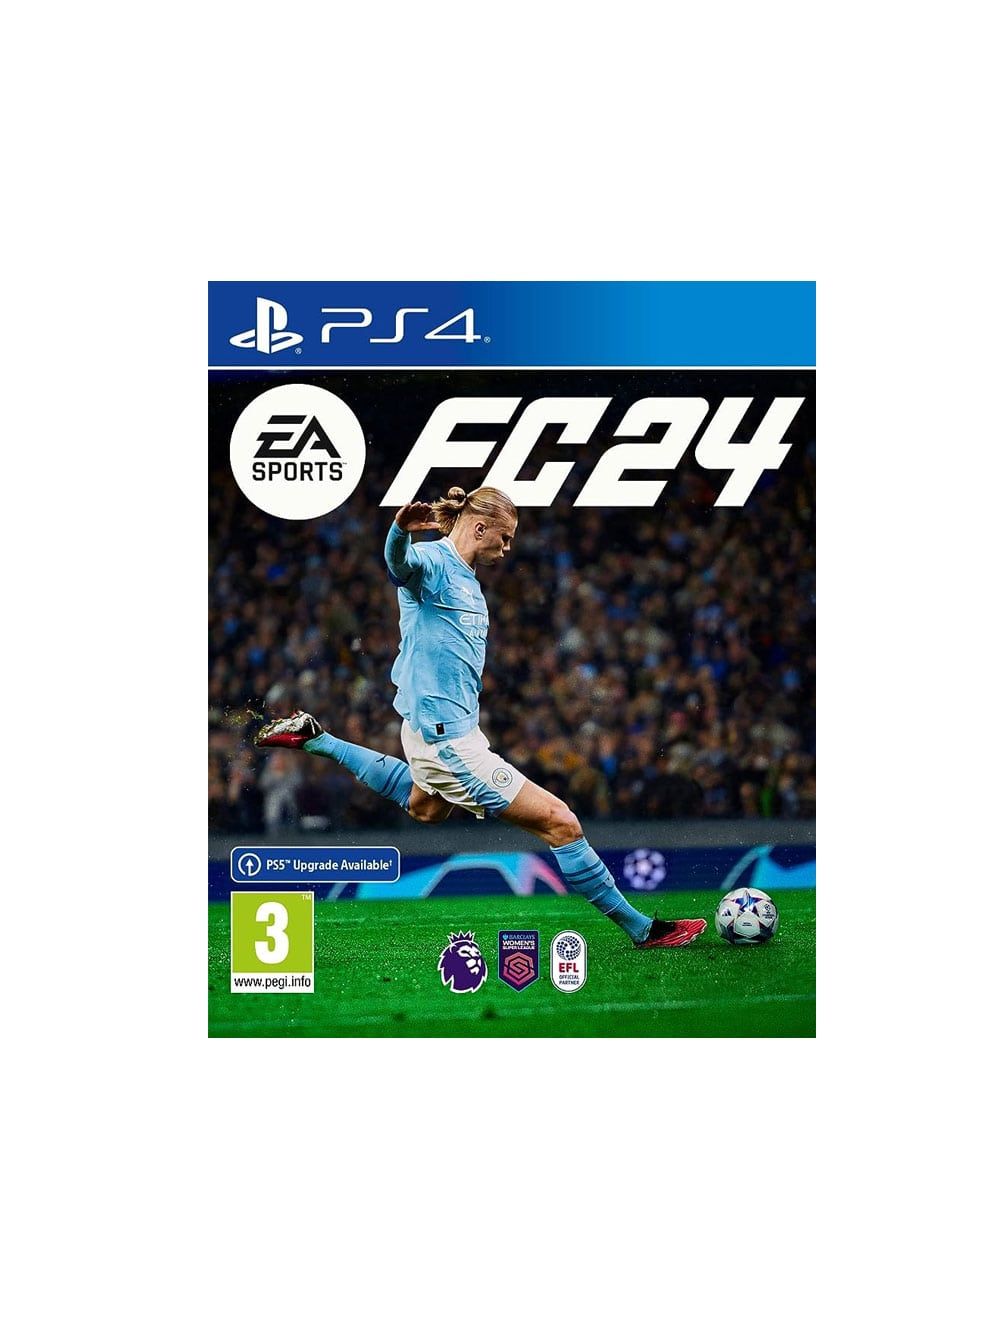 FIFA 2024 CD Game For PlayStation 4 - English Edition